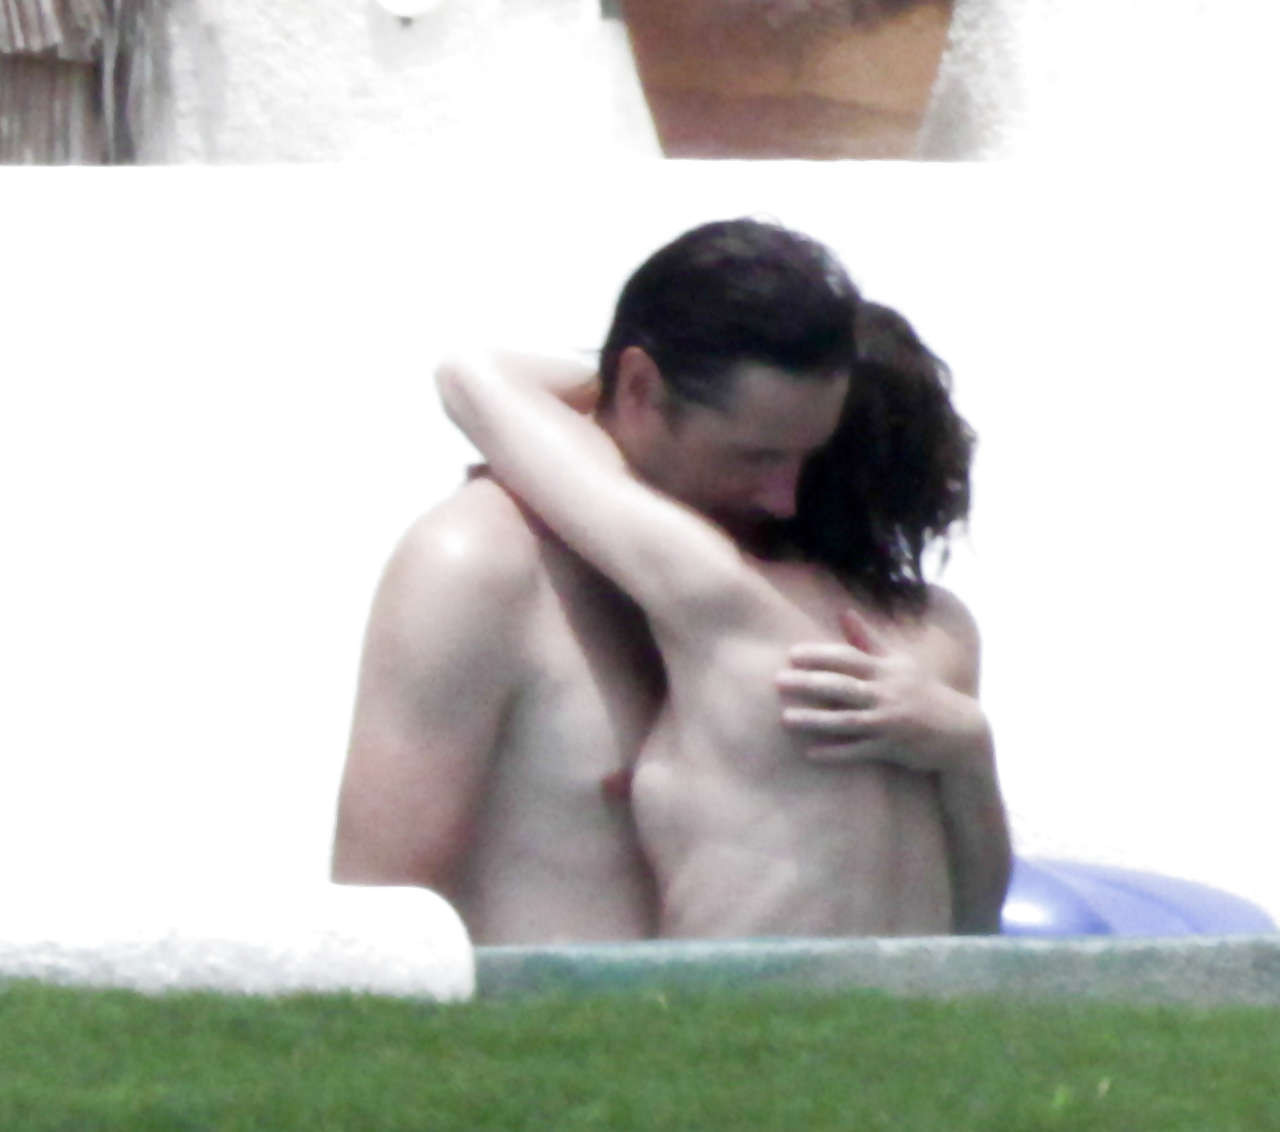 Milla Jovovich caught topless in pool by paparazzi and giving them middle finger #75289848